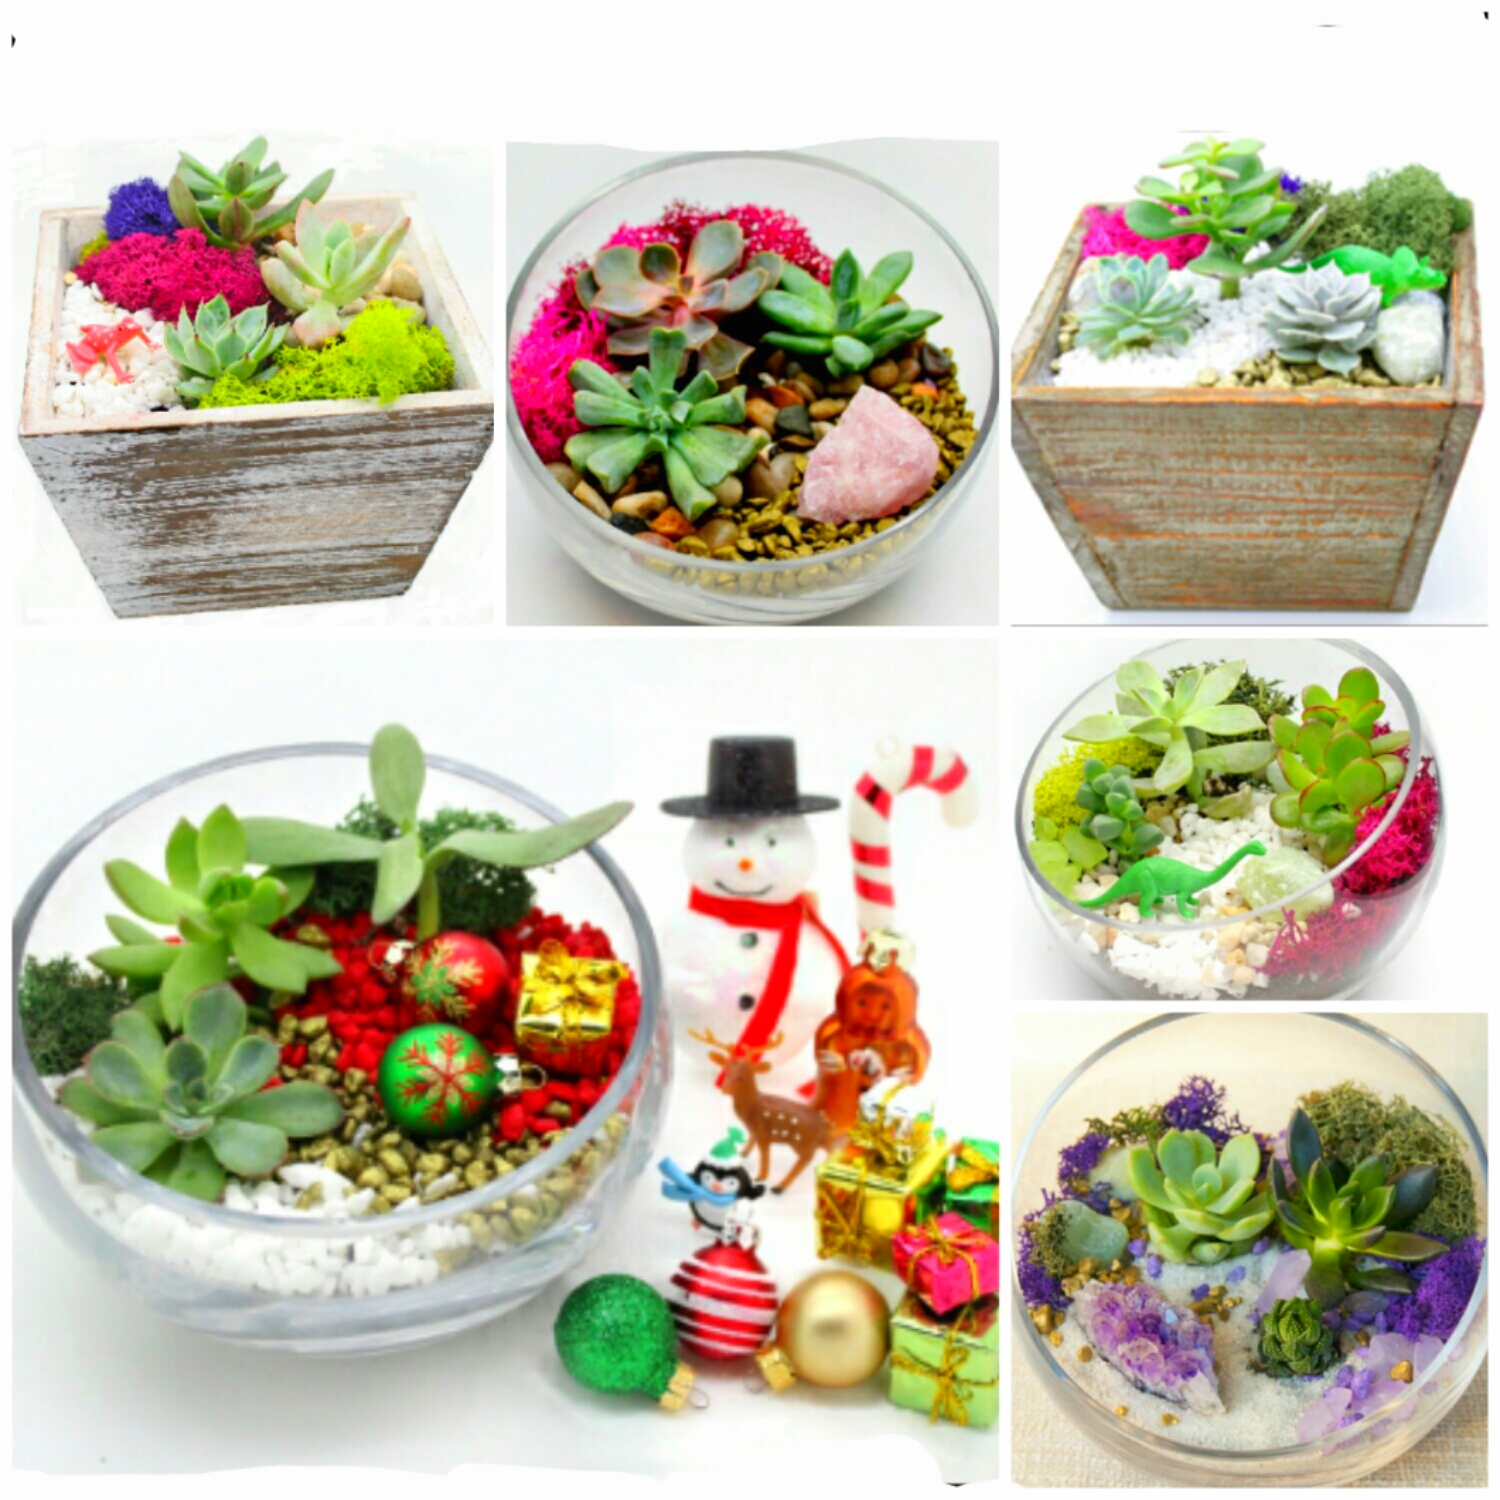 A Pick a Succulent Garden Box or Glass Terrarium Design Classic Design Options and Bonus Holiday Decorations plant nite project by Yaymaker